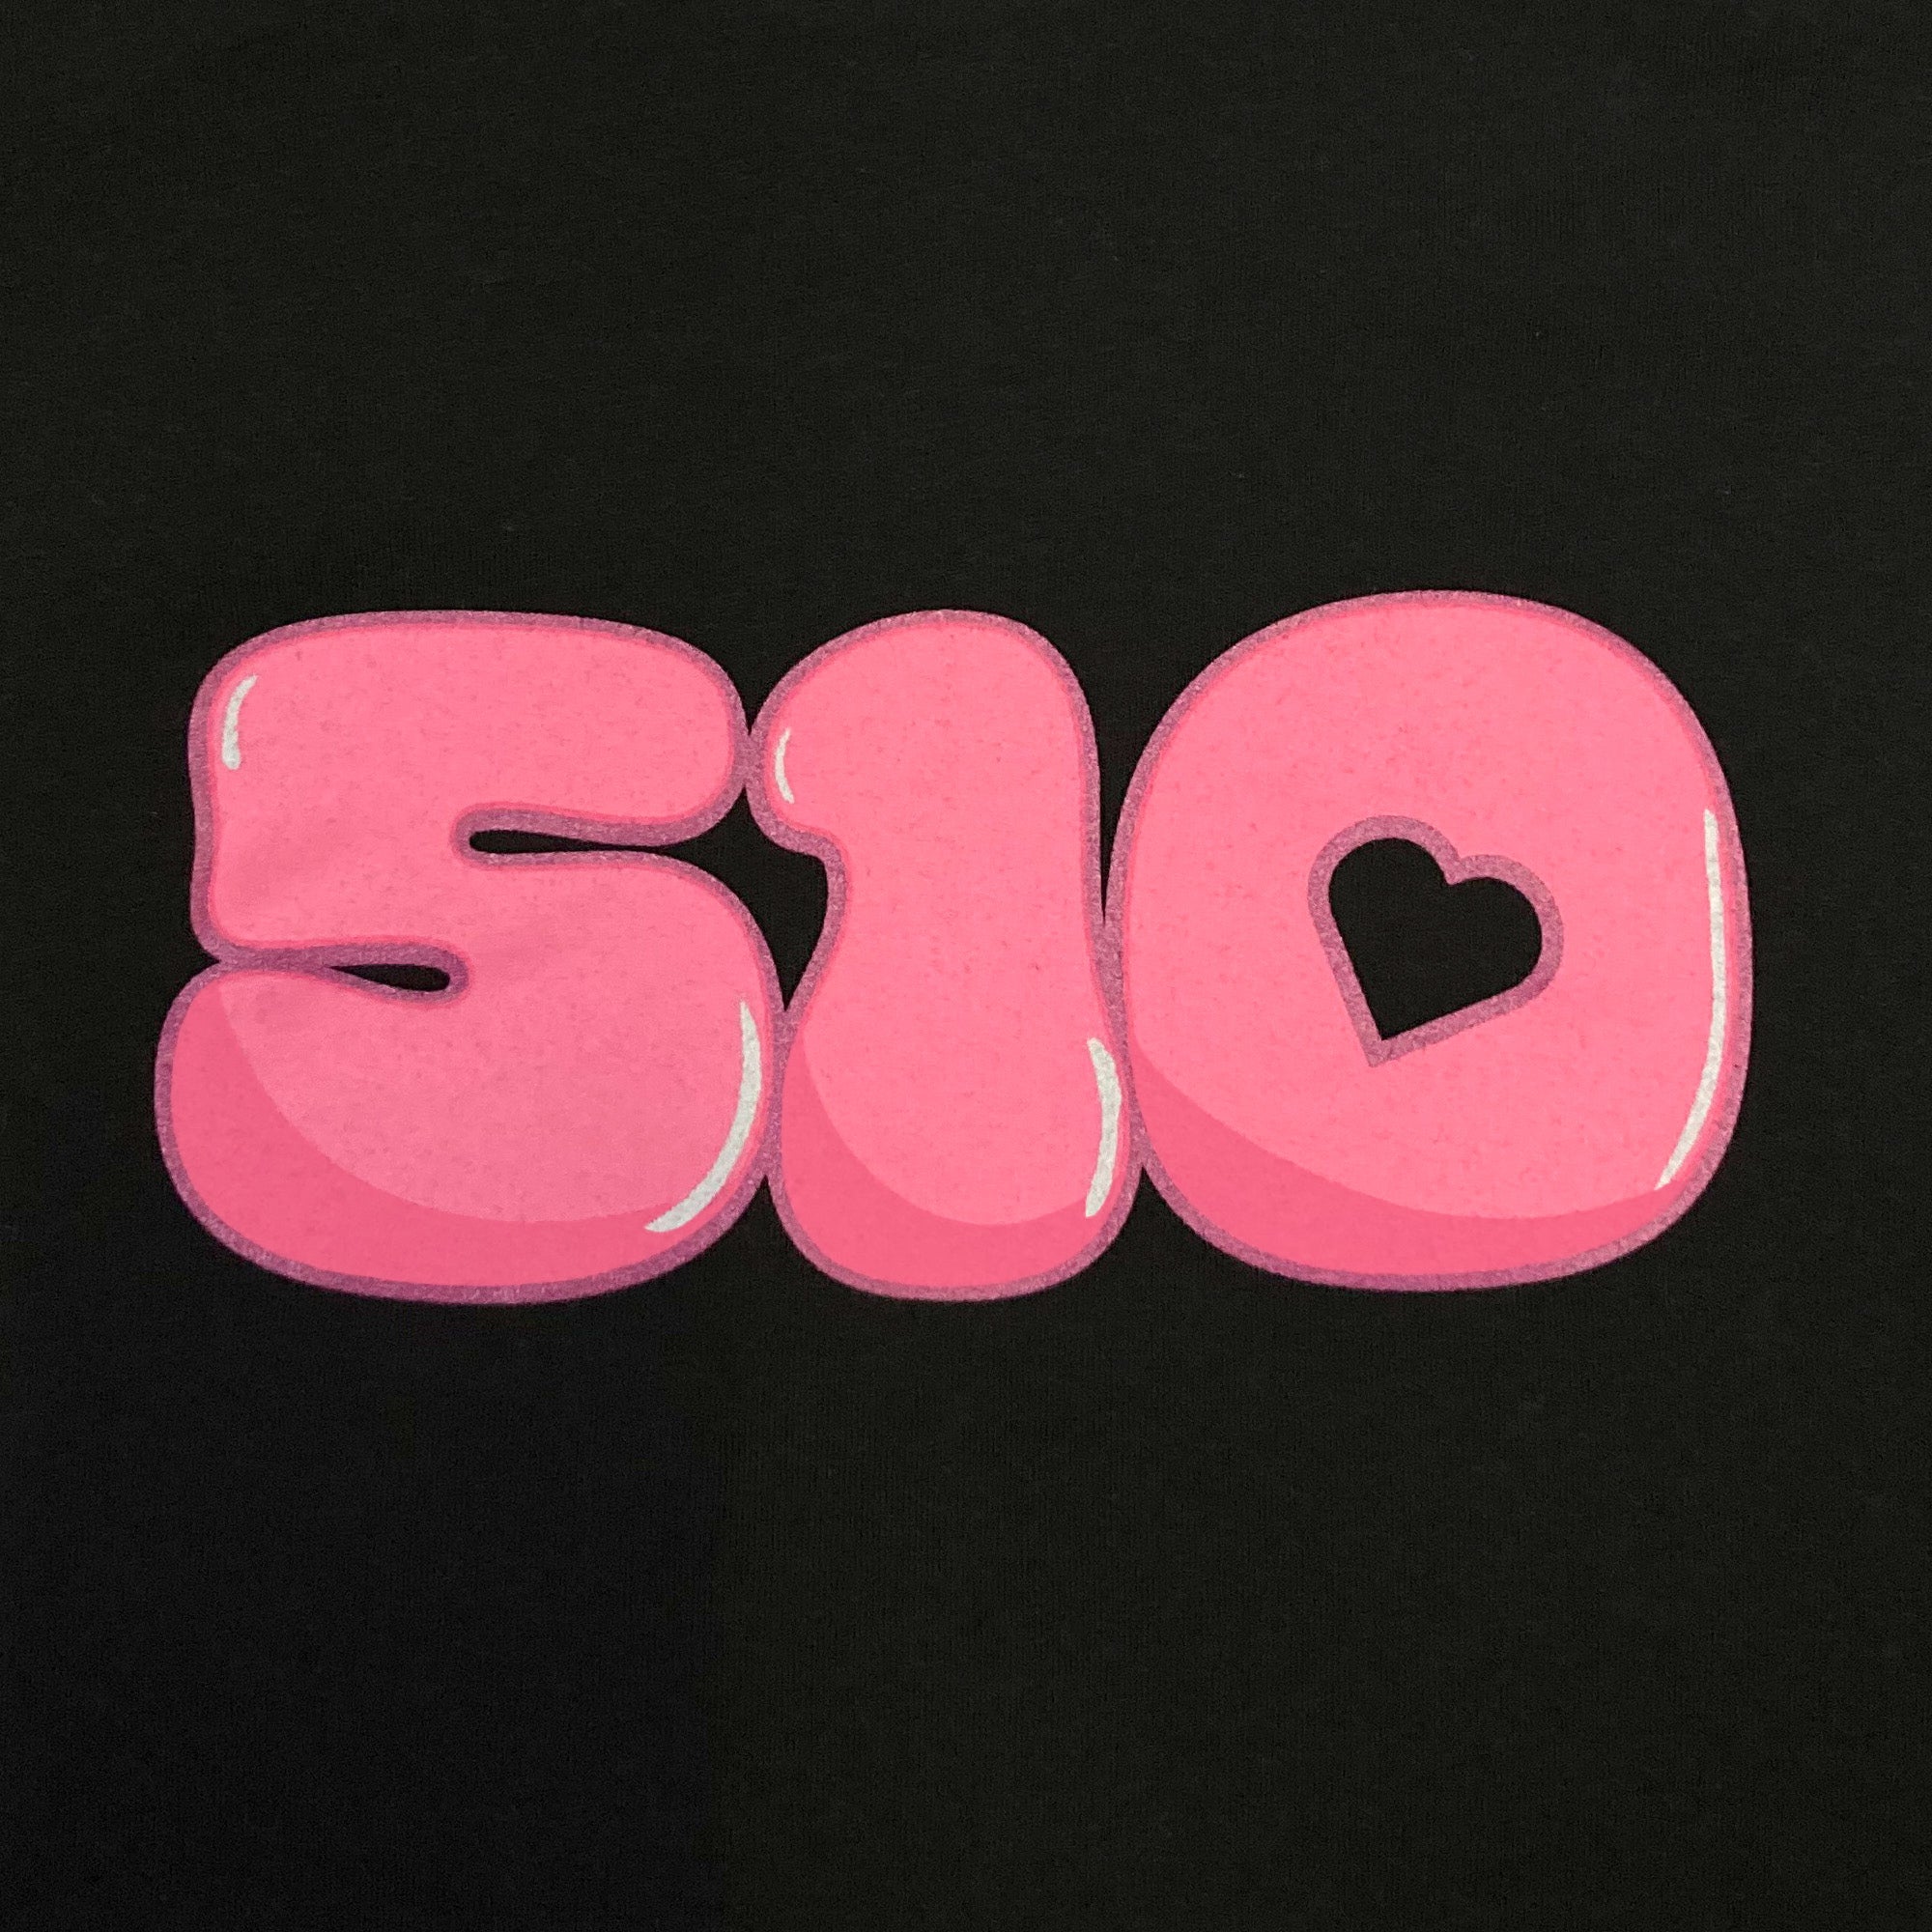 Detailed close-up of pink bubble numbers 510 graphic with the hole in the 0 shaped as a heart one a Women's black t-shirt.